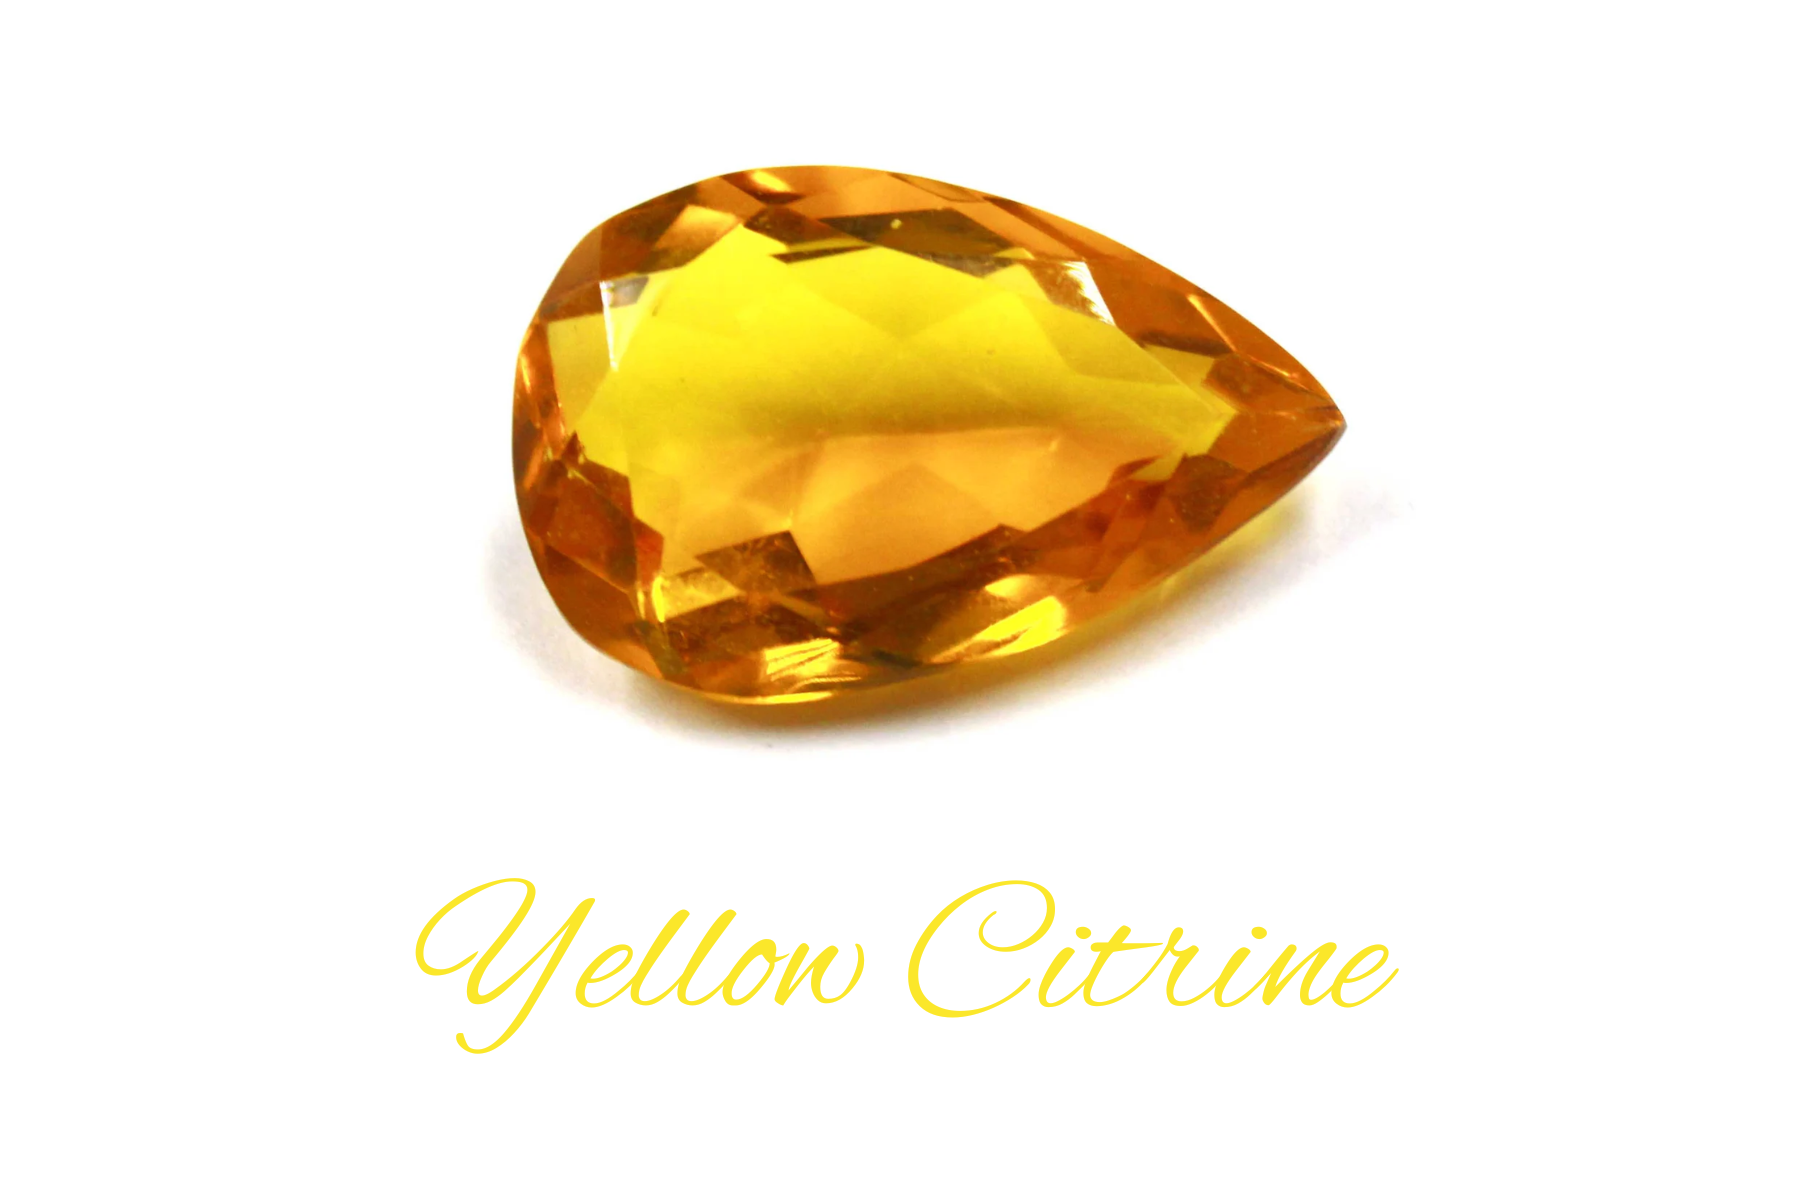 Pointed yellow citrine